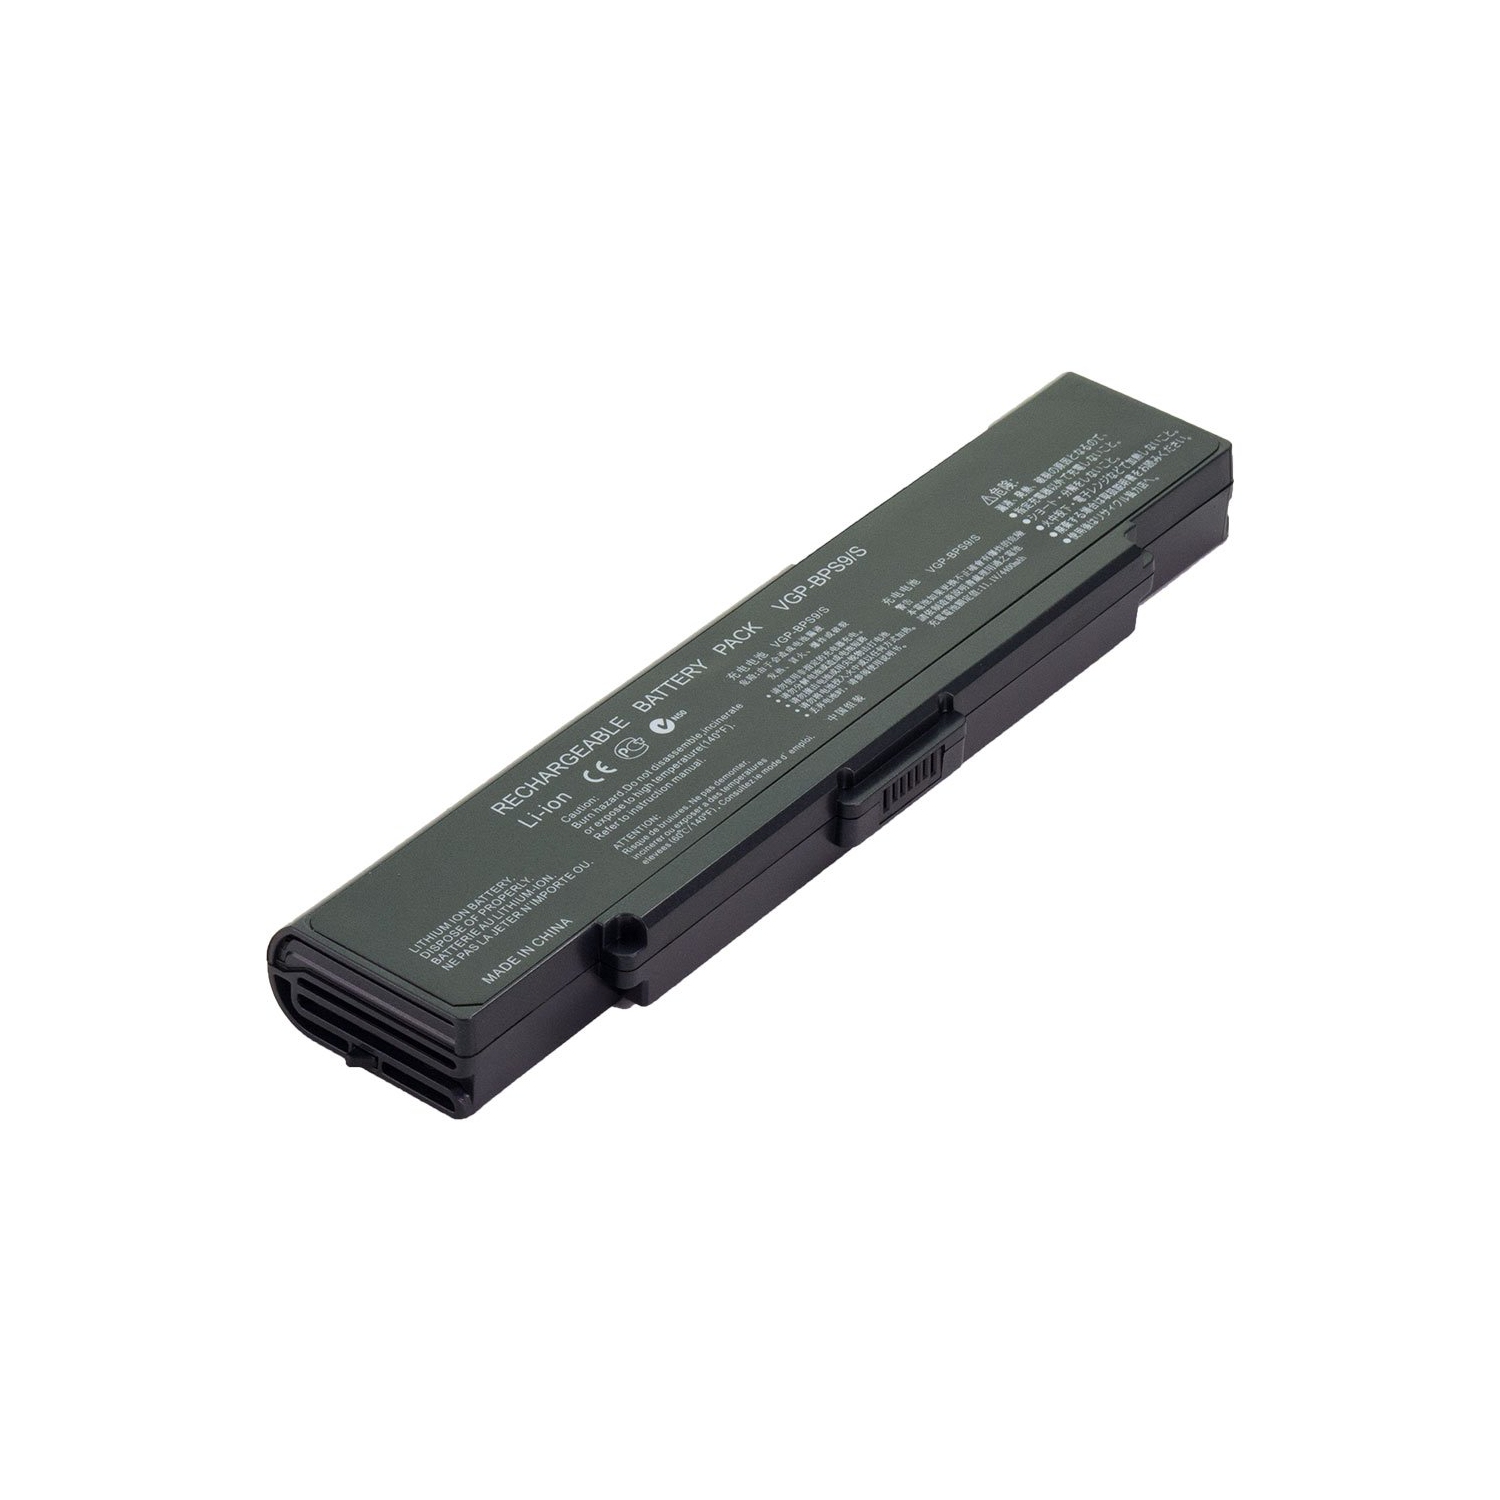 Laptop Battery Replacement for Sony VAIO VGN-CR205E/P, VGP-BPL9, VGP-BPS10/S, VGP-BPS10A/B, VGP-BPS9A, VGP-BPS9B